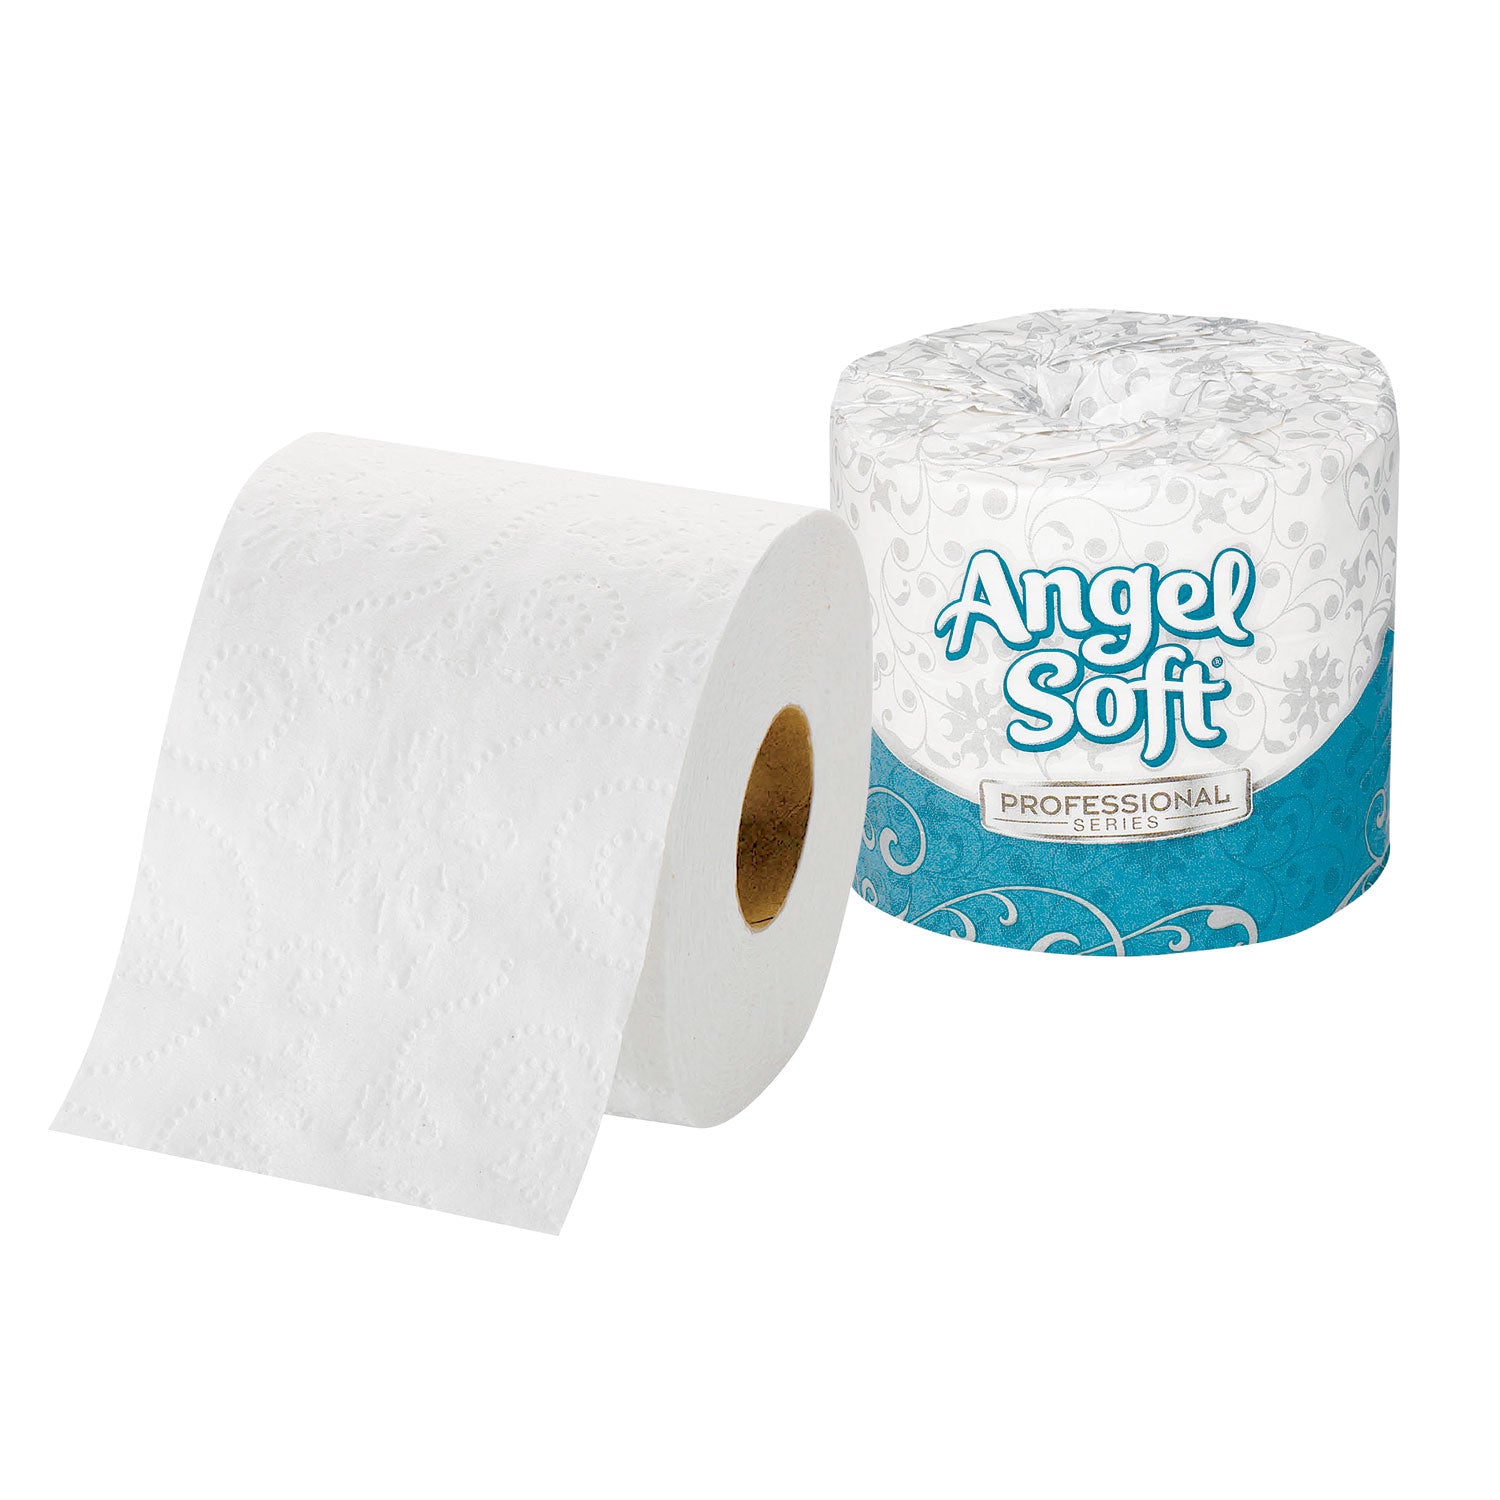 Angel Soft ps Premium Bathroom Tissue, Septic Safe, 2-Ply, White, 450 Sheets/Roll, 80 Rolls/Carton - 